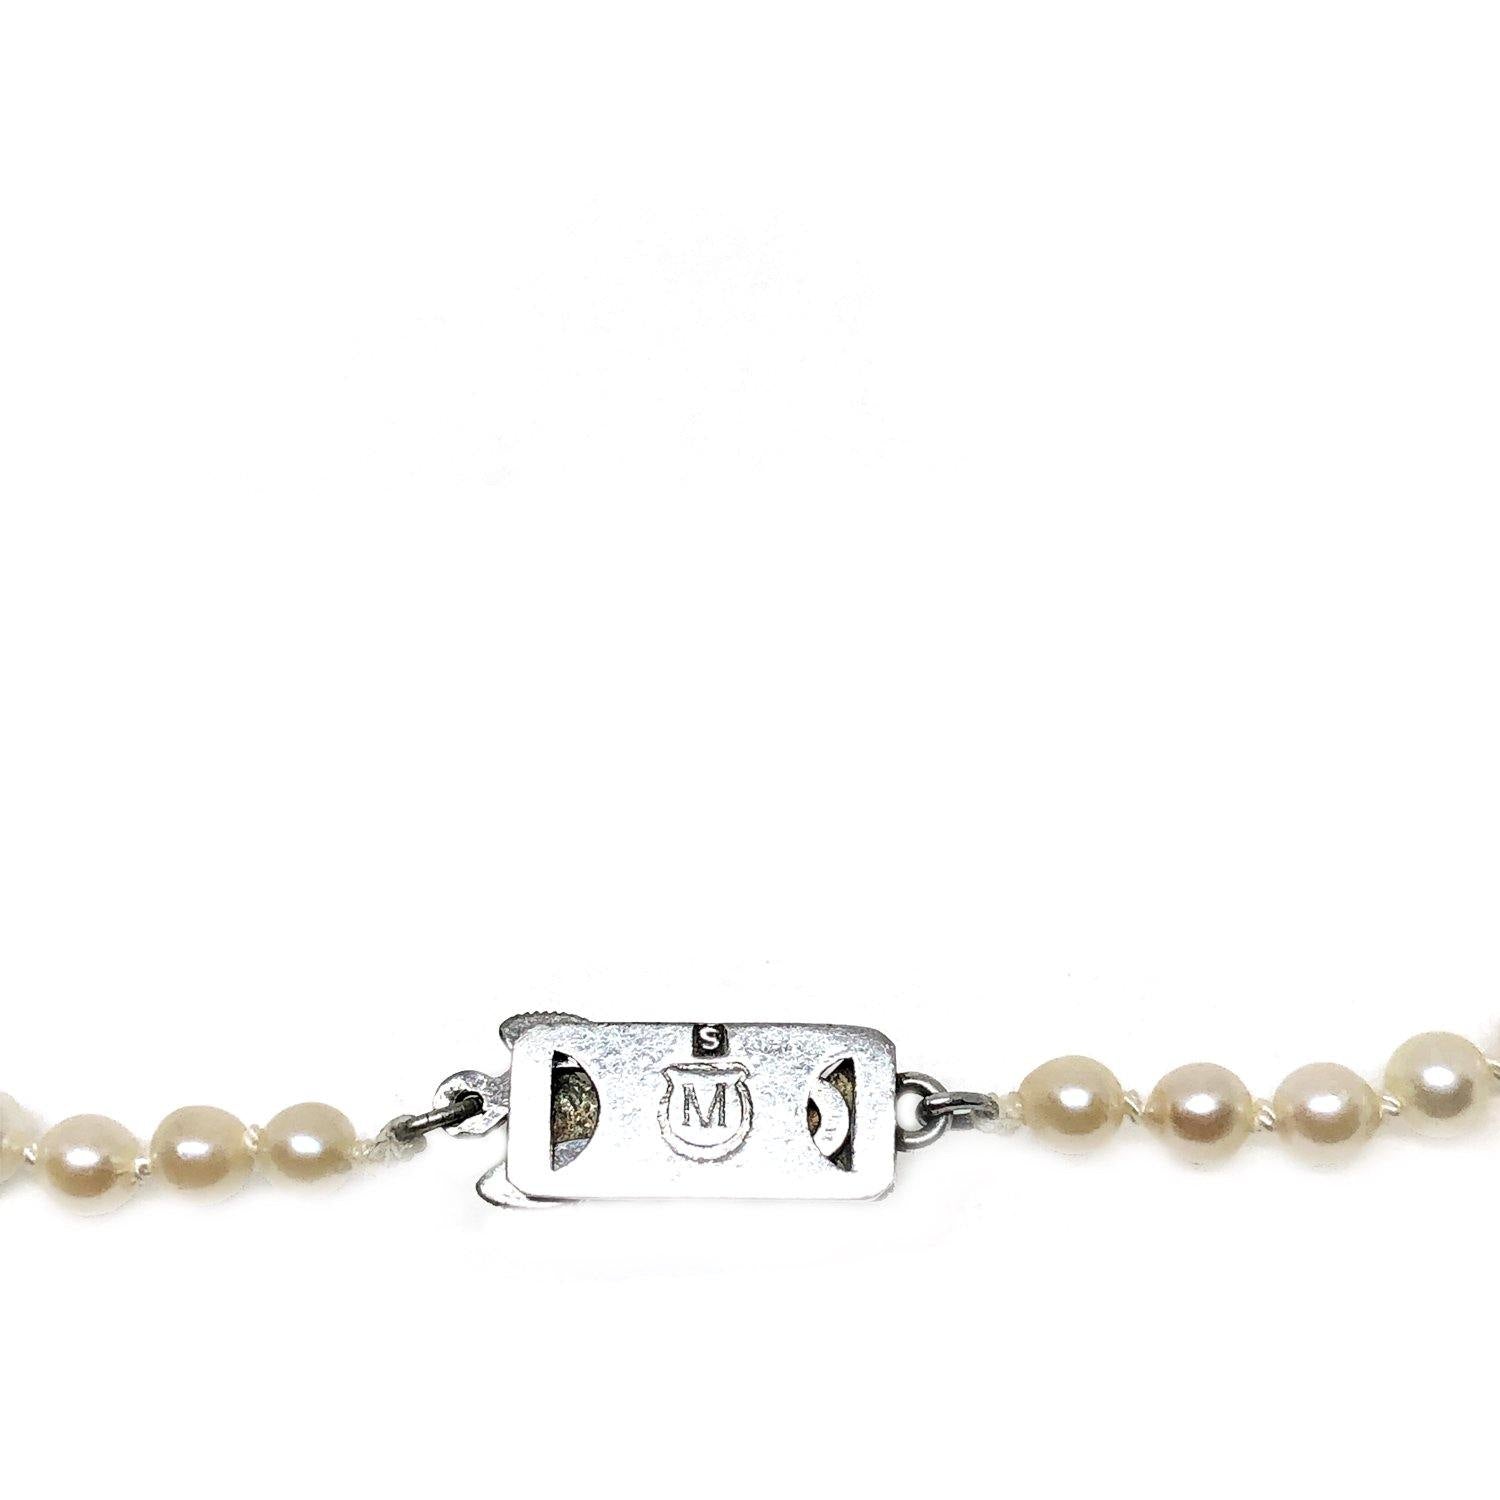 Mikimoto Graduated Japanese Cultured Akoya Pearl Strand - Sterling Silver 20 Inch